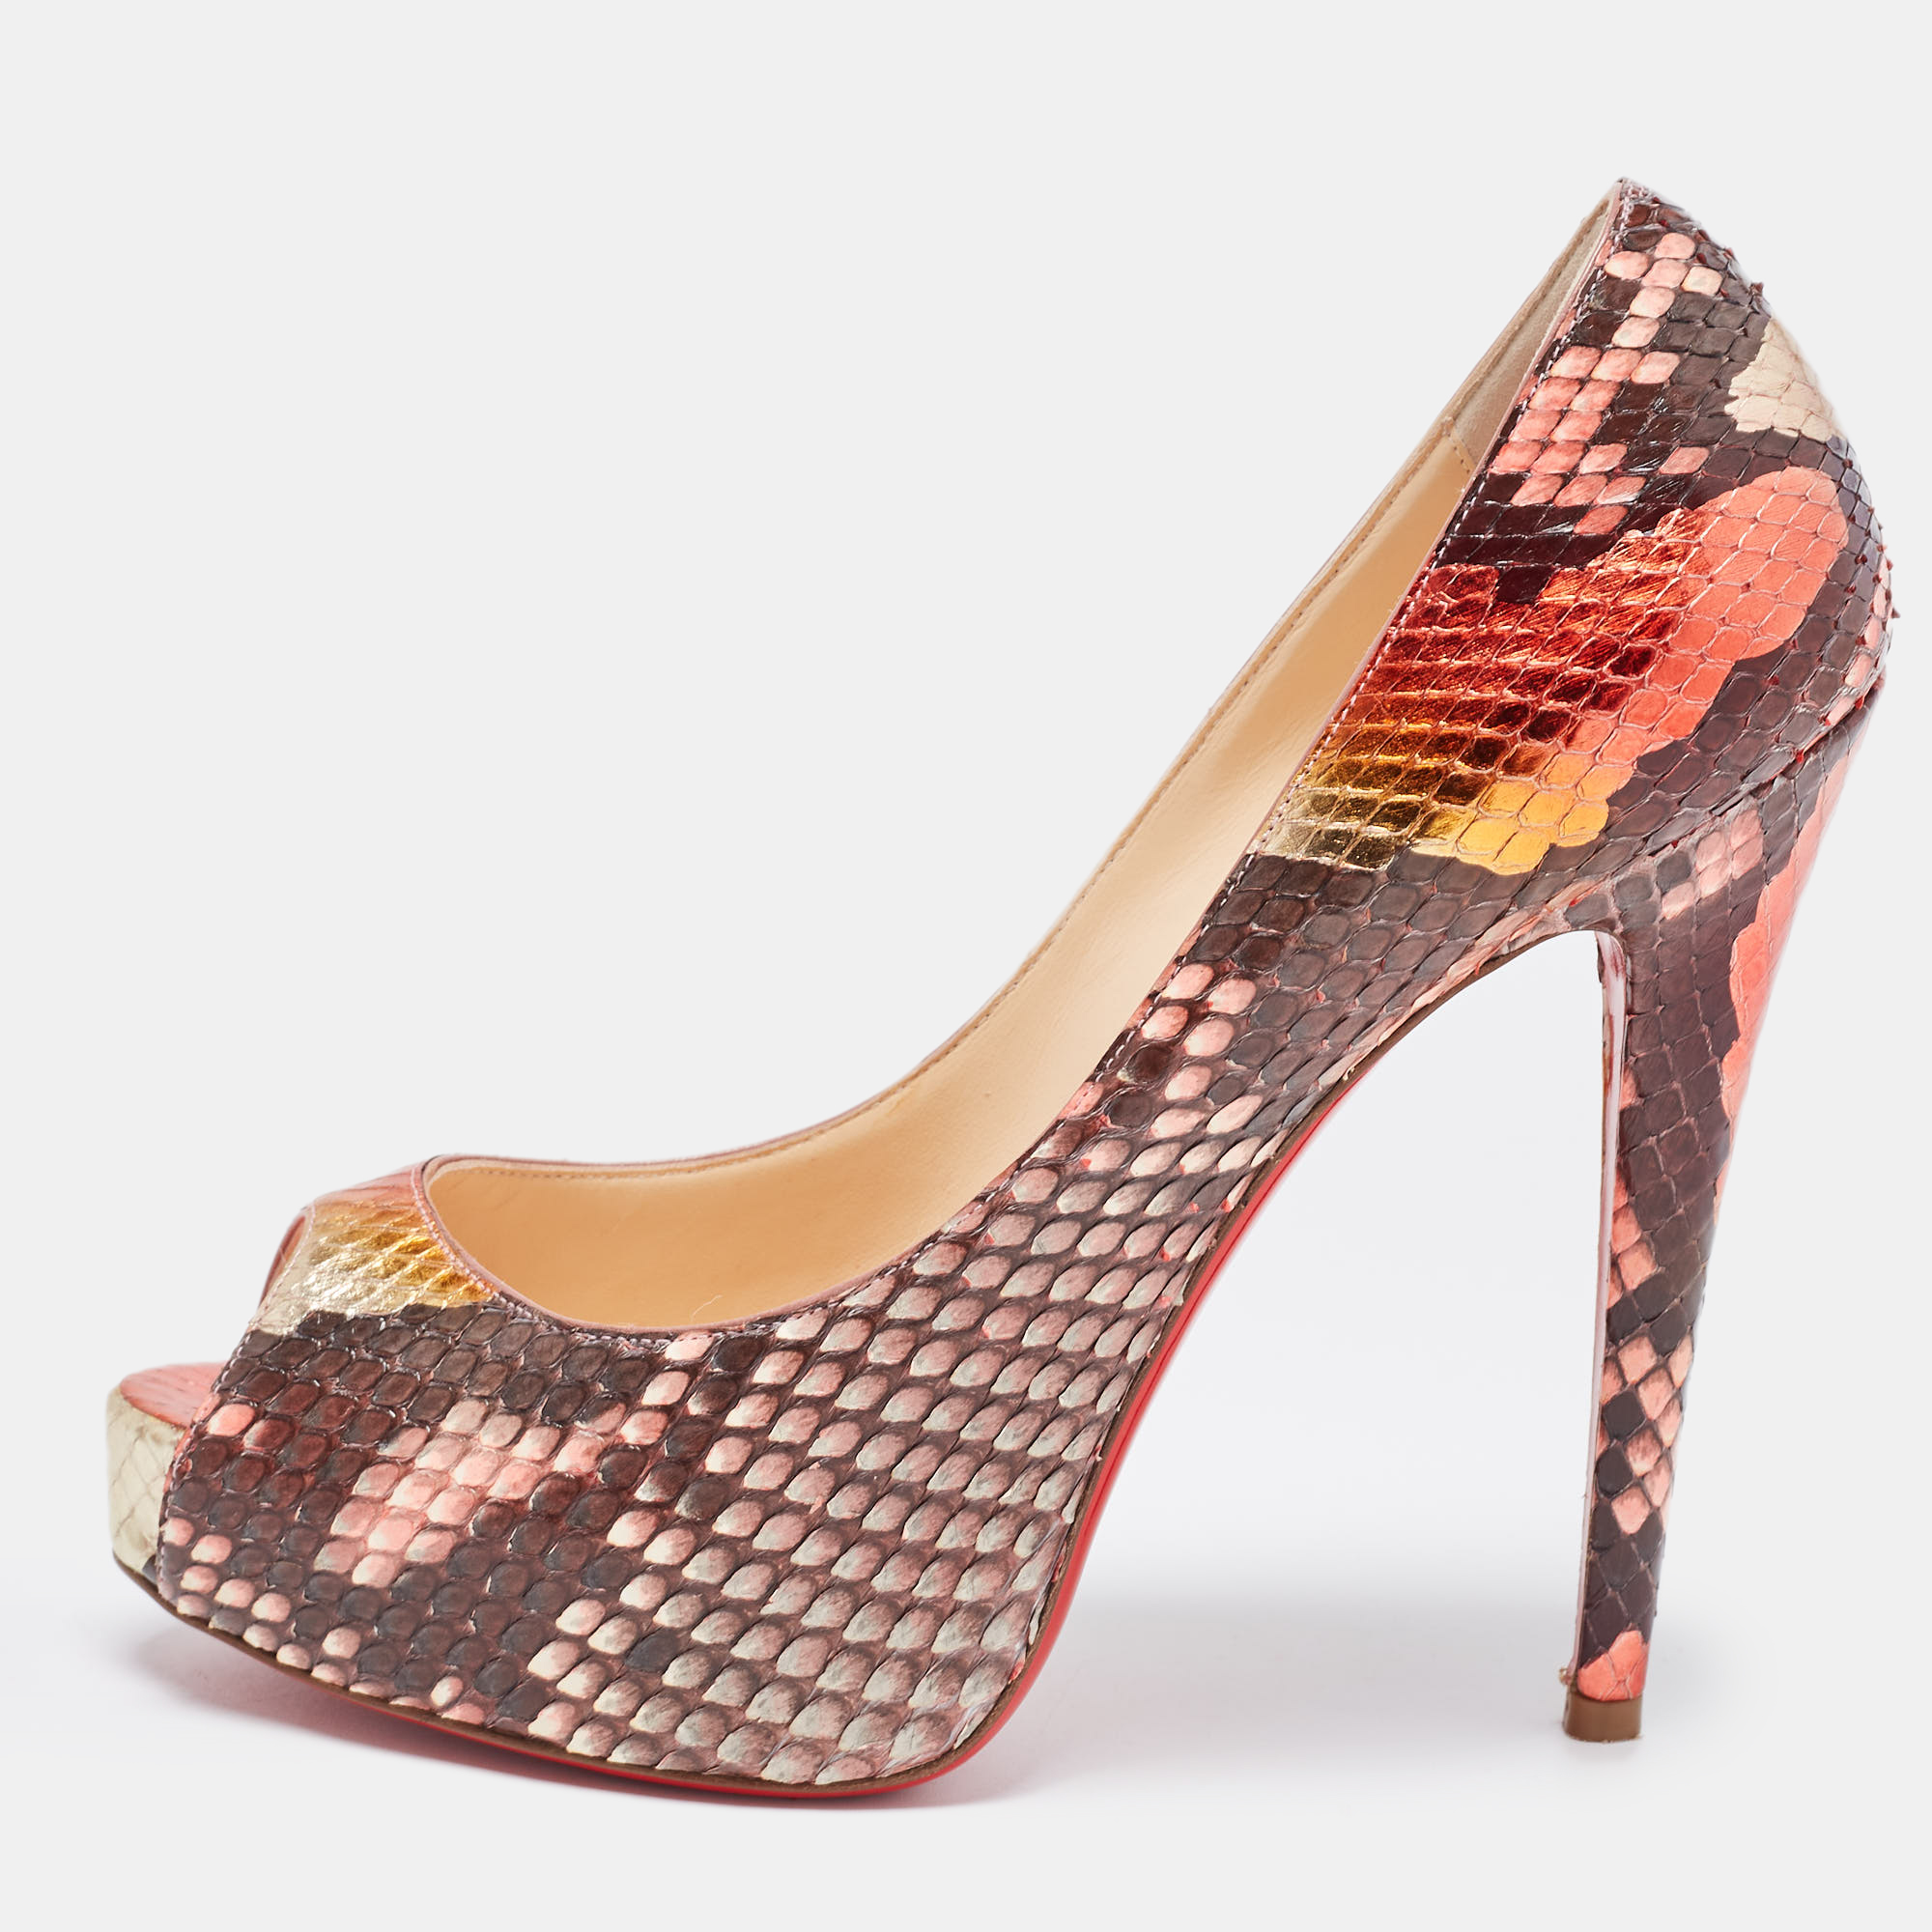 Pre-owned Christian Louboutin Multicolor Python Leather Very Prive Peep Toe Platform Pumps Size 37